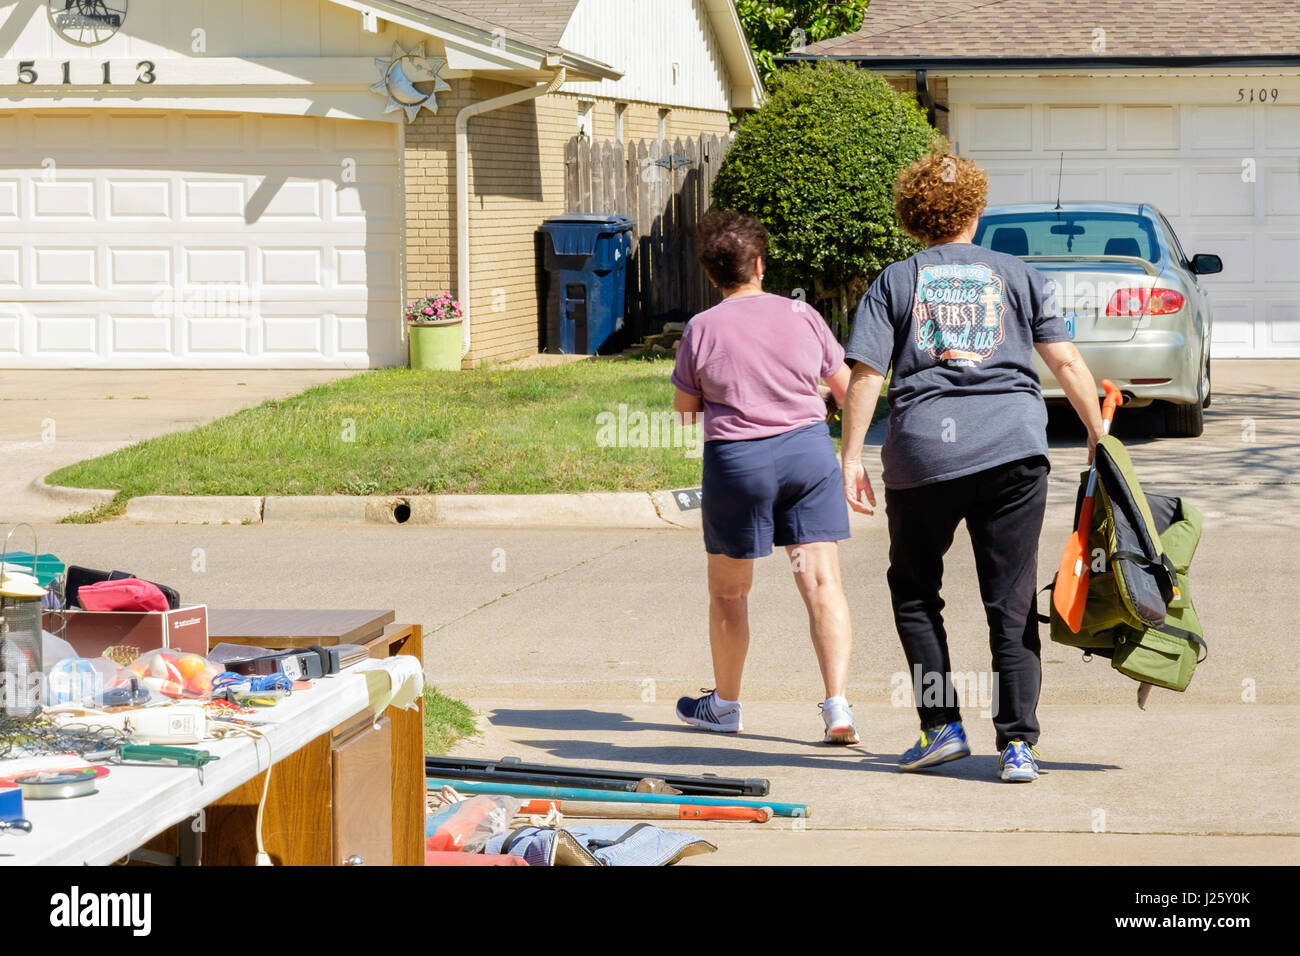 Two mature women walk away after purchasing merchandise including life jackets at a garage sale, or rummage sale, in Oklahoma City, Oklahoma, USA. Stock Photo